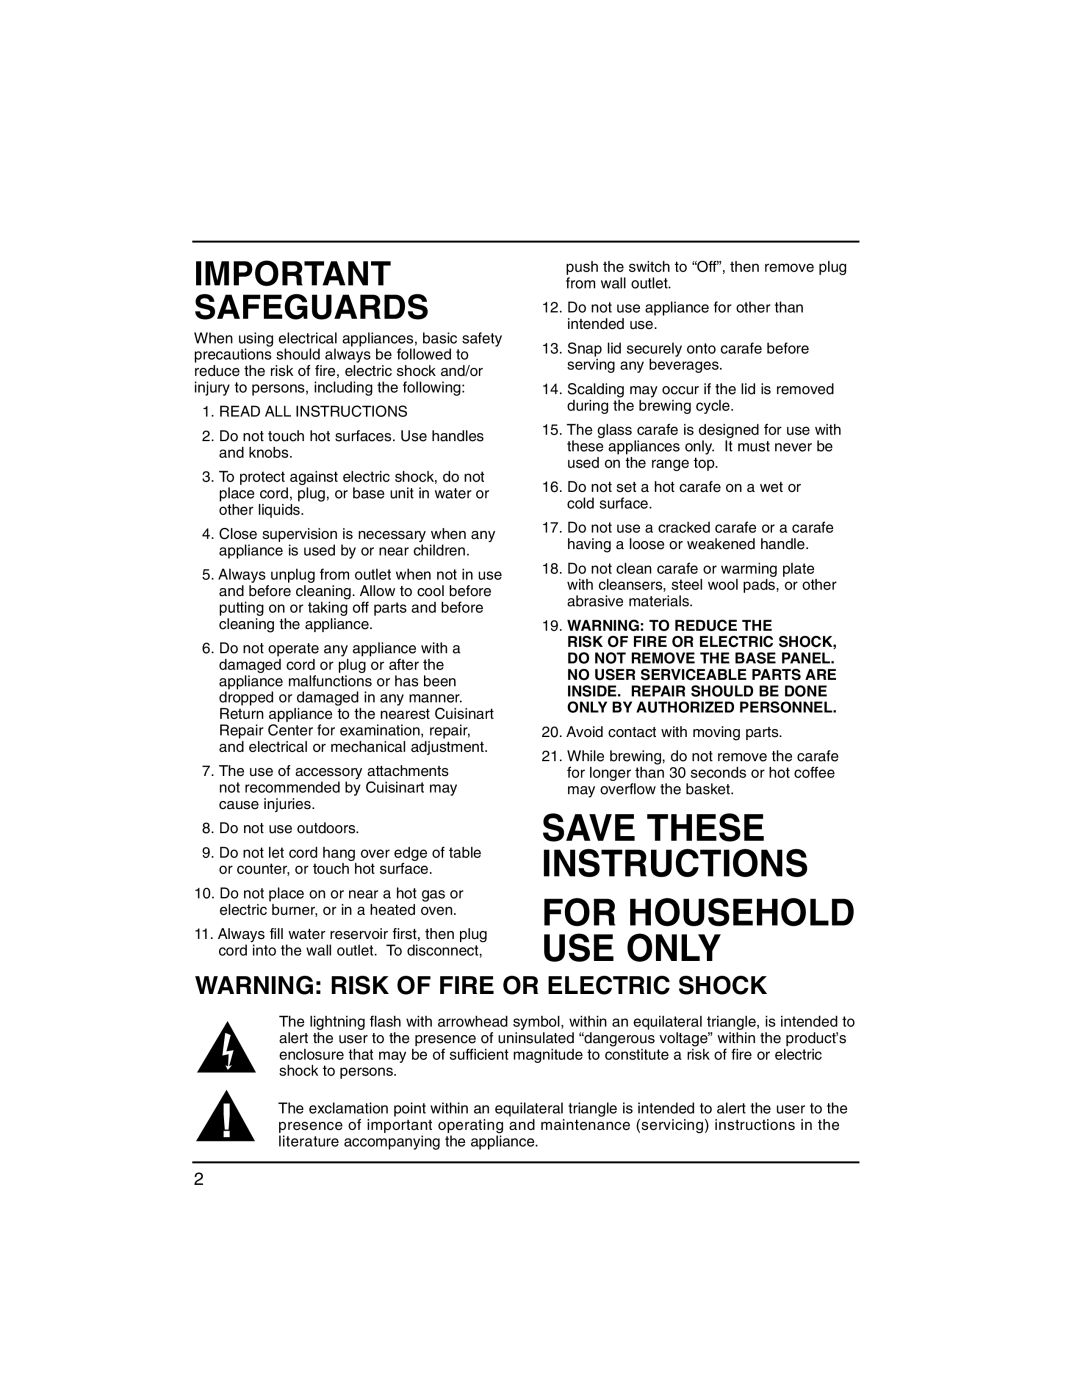 Cuisinart DCC-100C manual Warning Risk Of Fire Or Electric Shock, For Household Use Only, Save These Instructions 